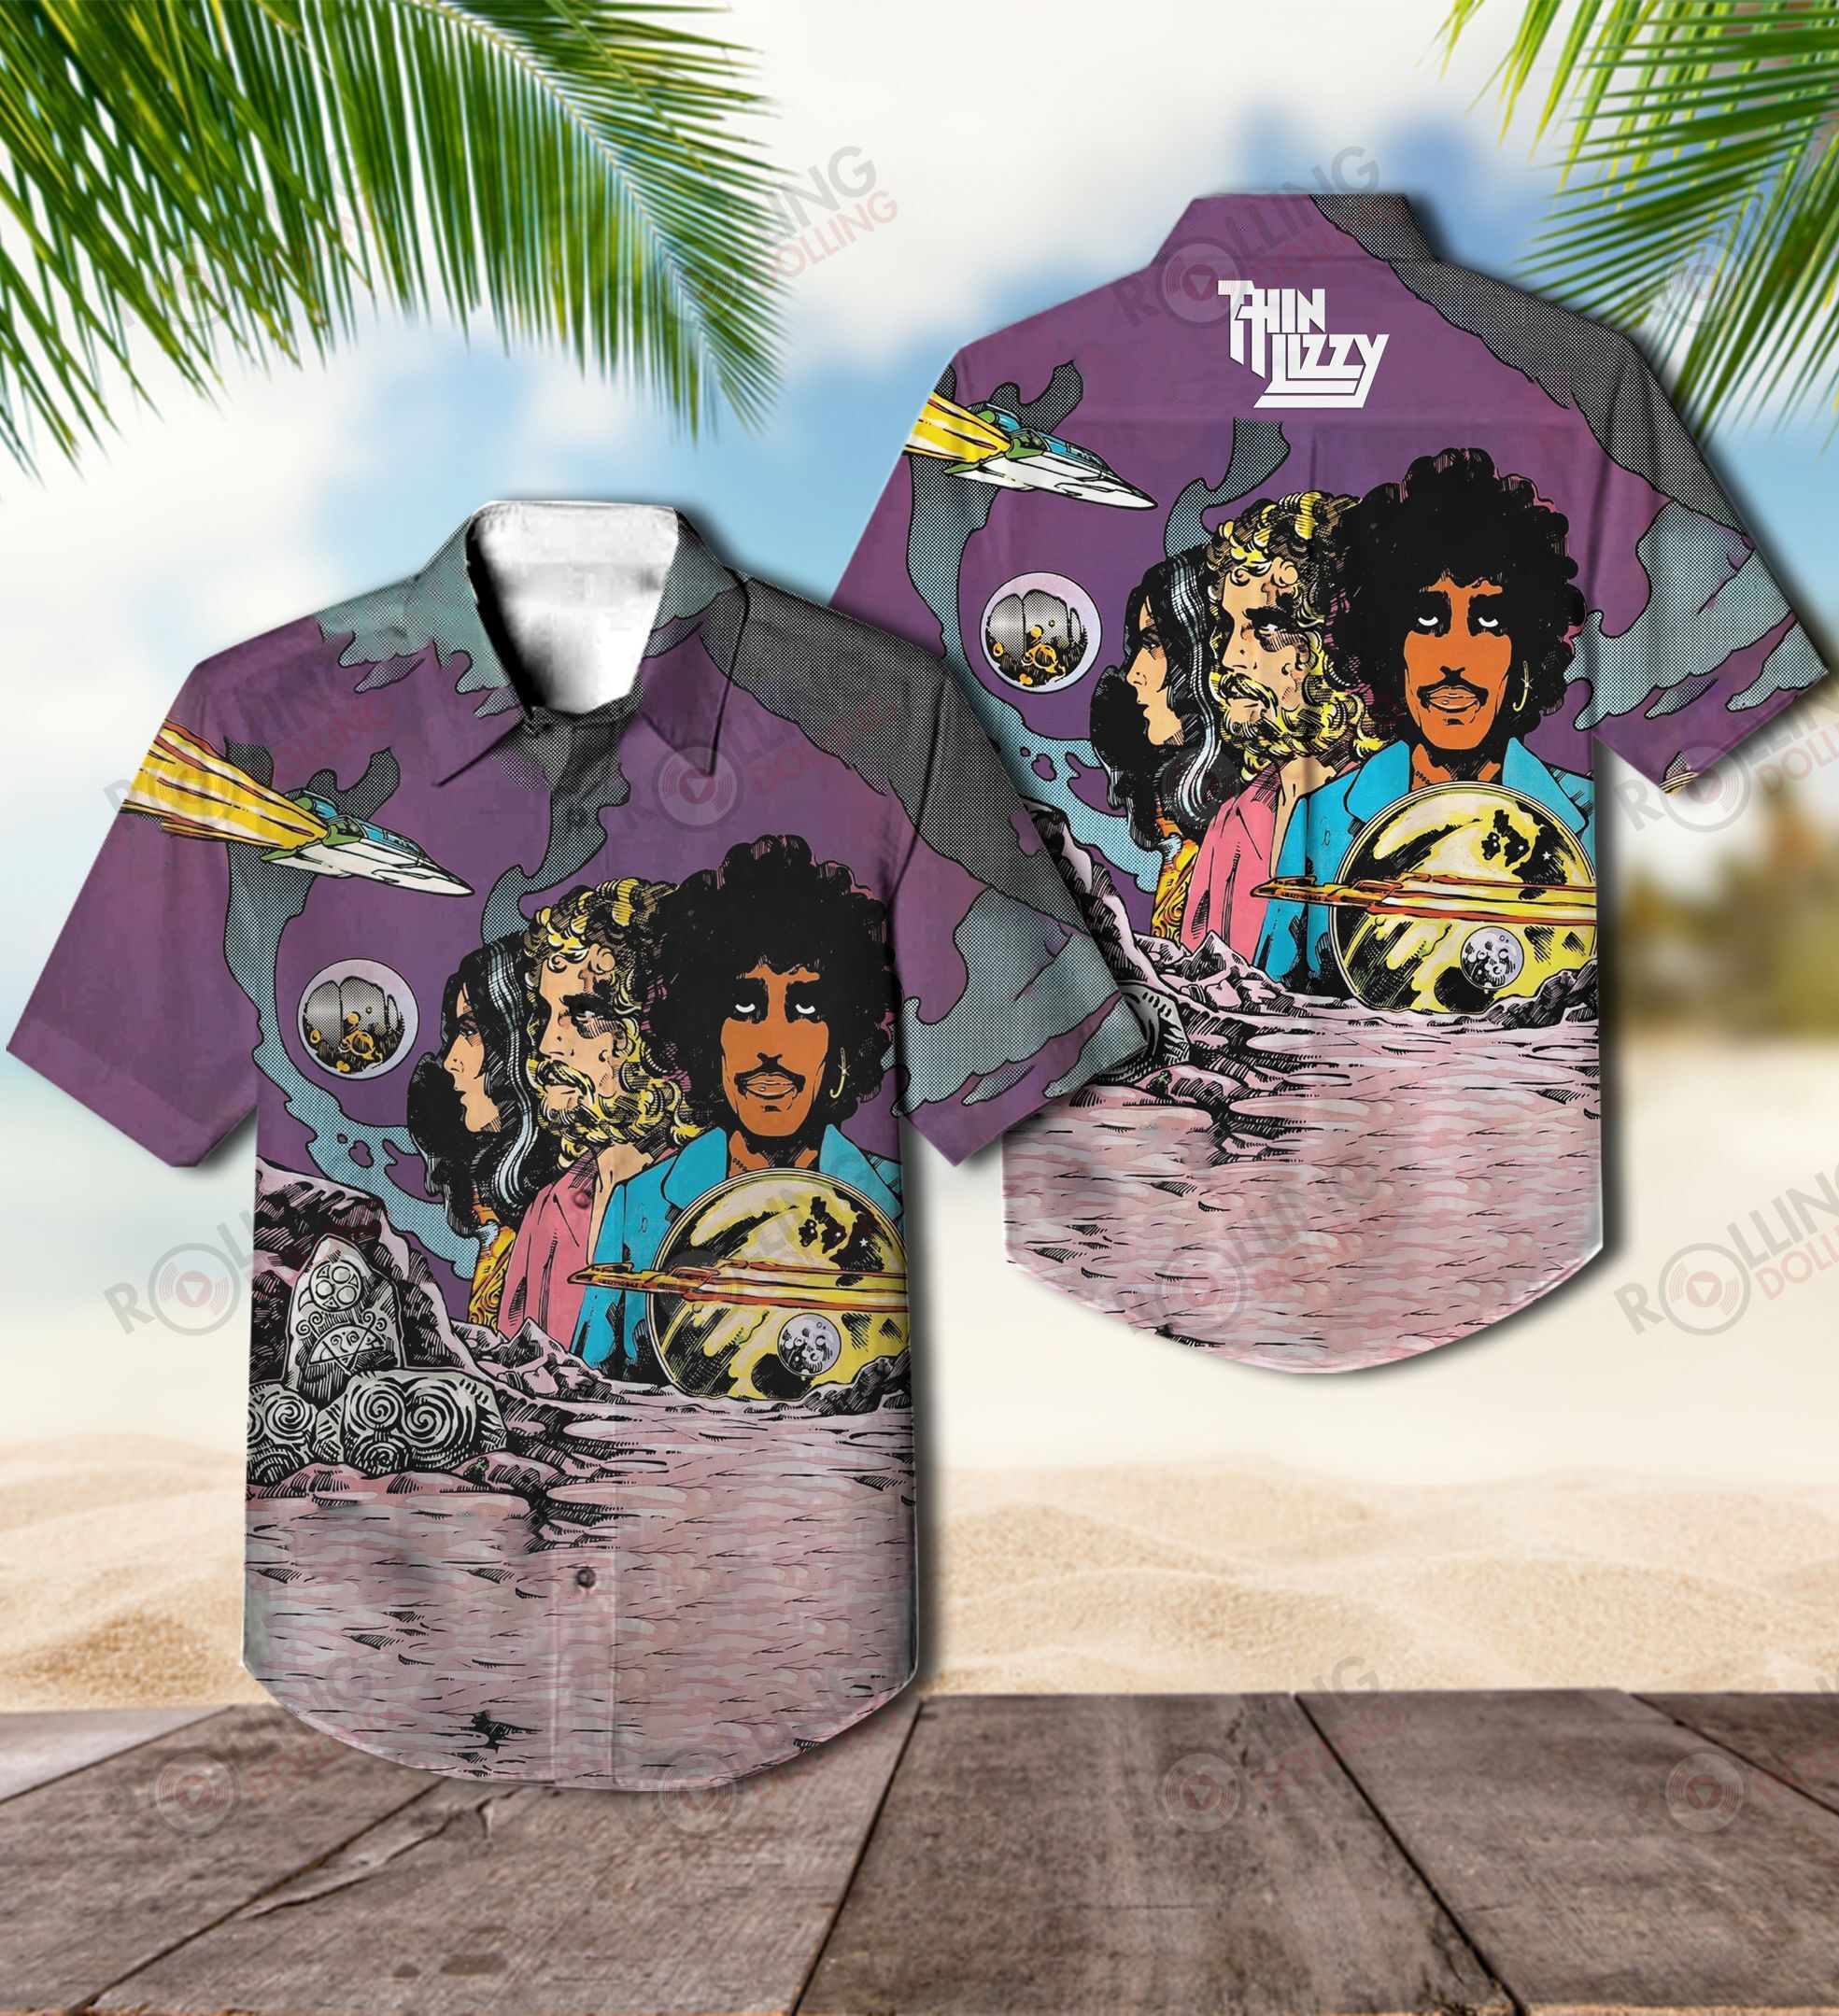 We have compiled a list of some of the best Hawaiian shirt that are available 209